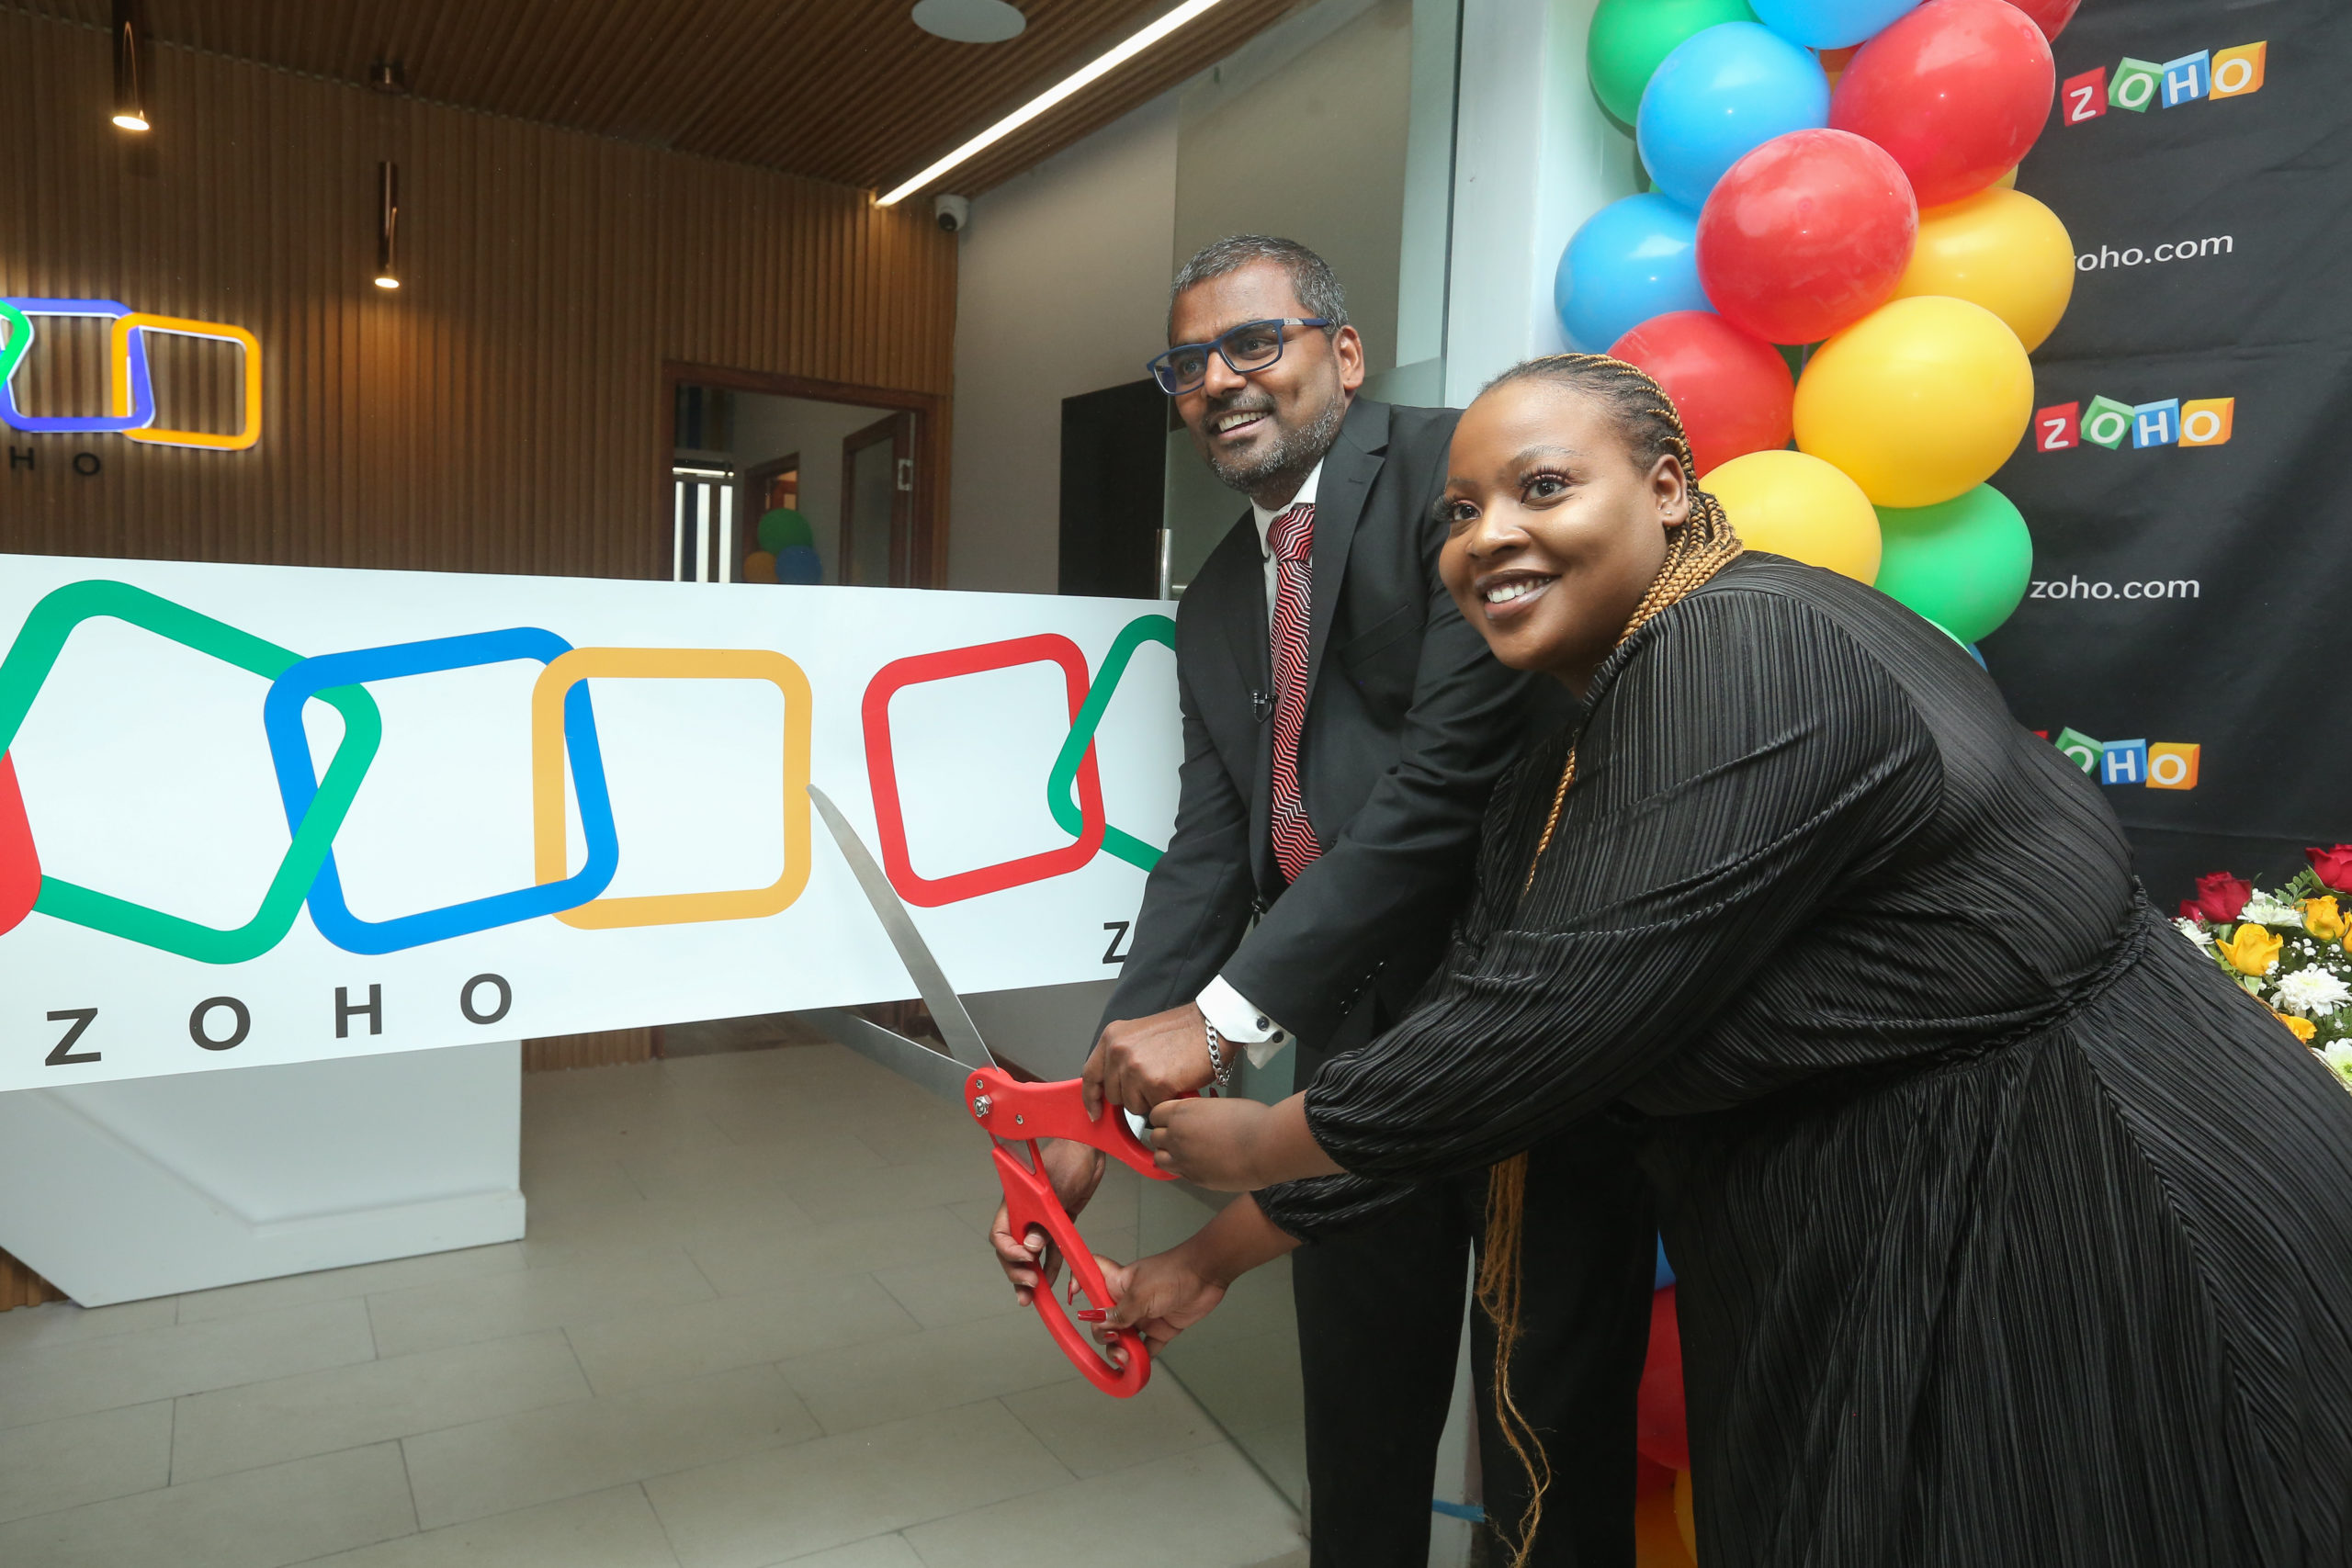 Zoho’s new workplace in Kenya is not going to pursue product improvement